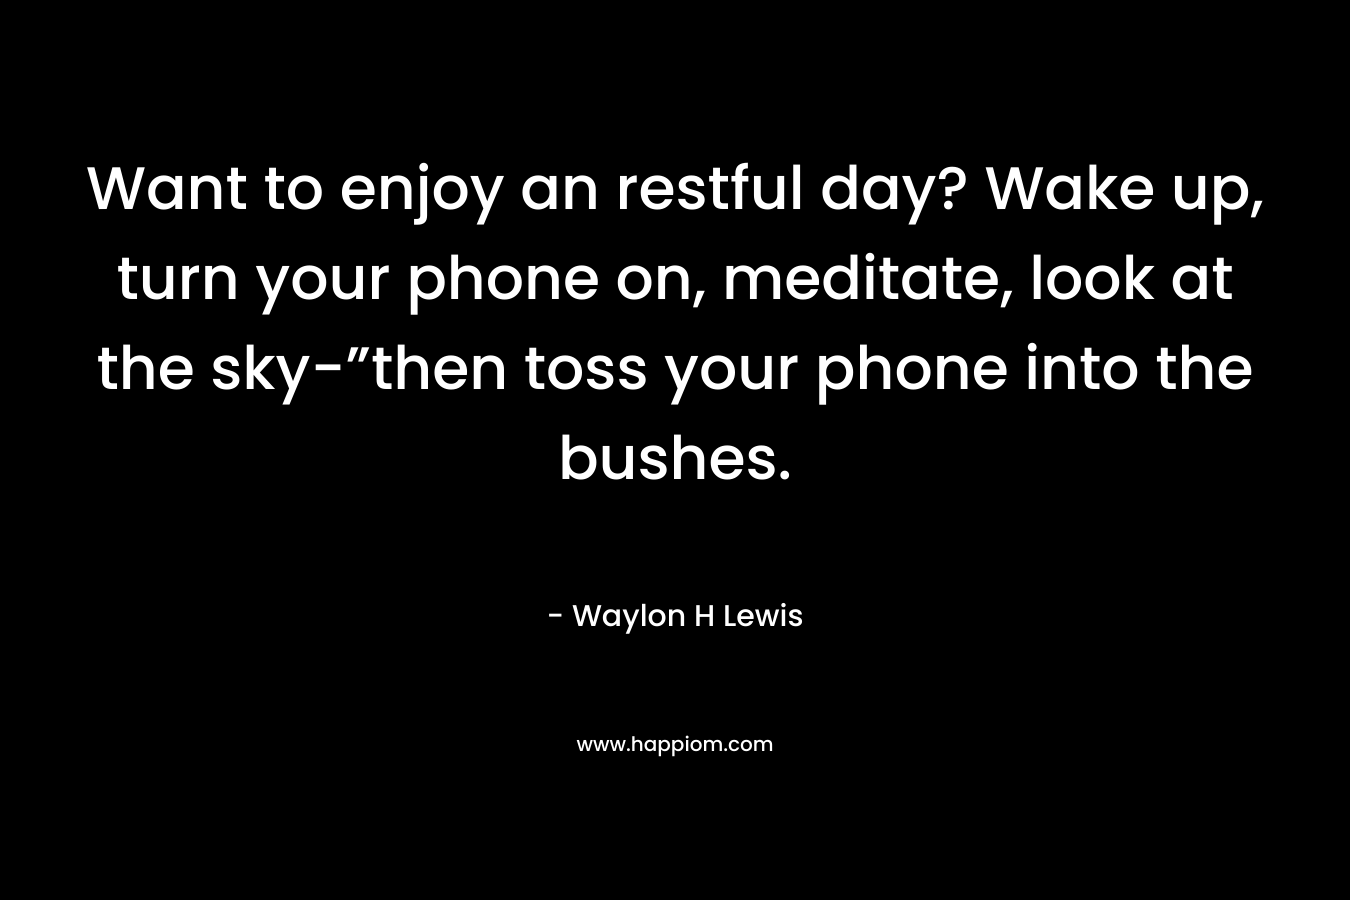 Want to enjoy an restful day? Wake up, turn your phone on, meditate, look at the sky-”then toss your phone into the bushes.